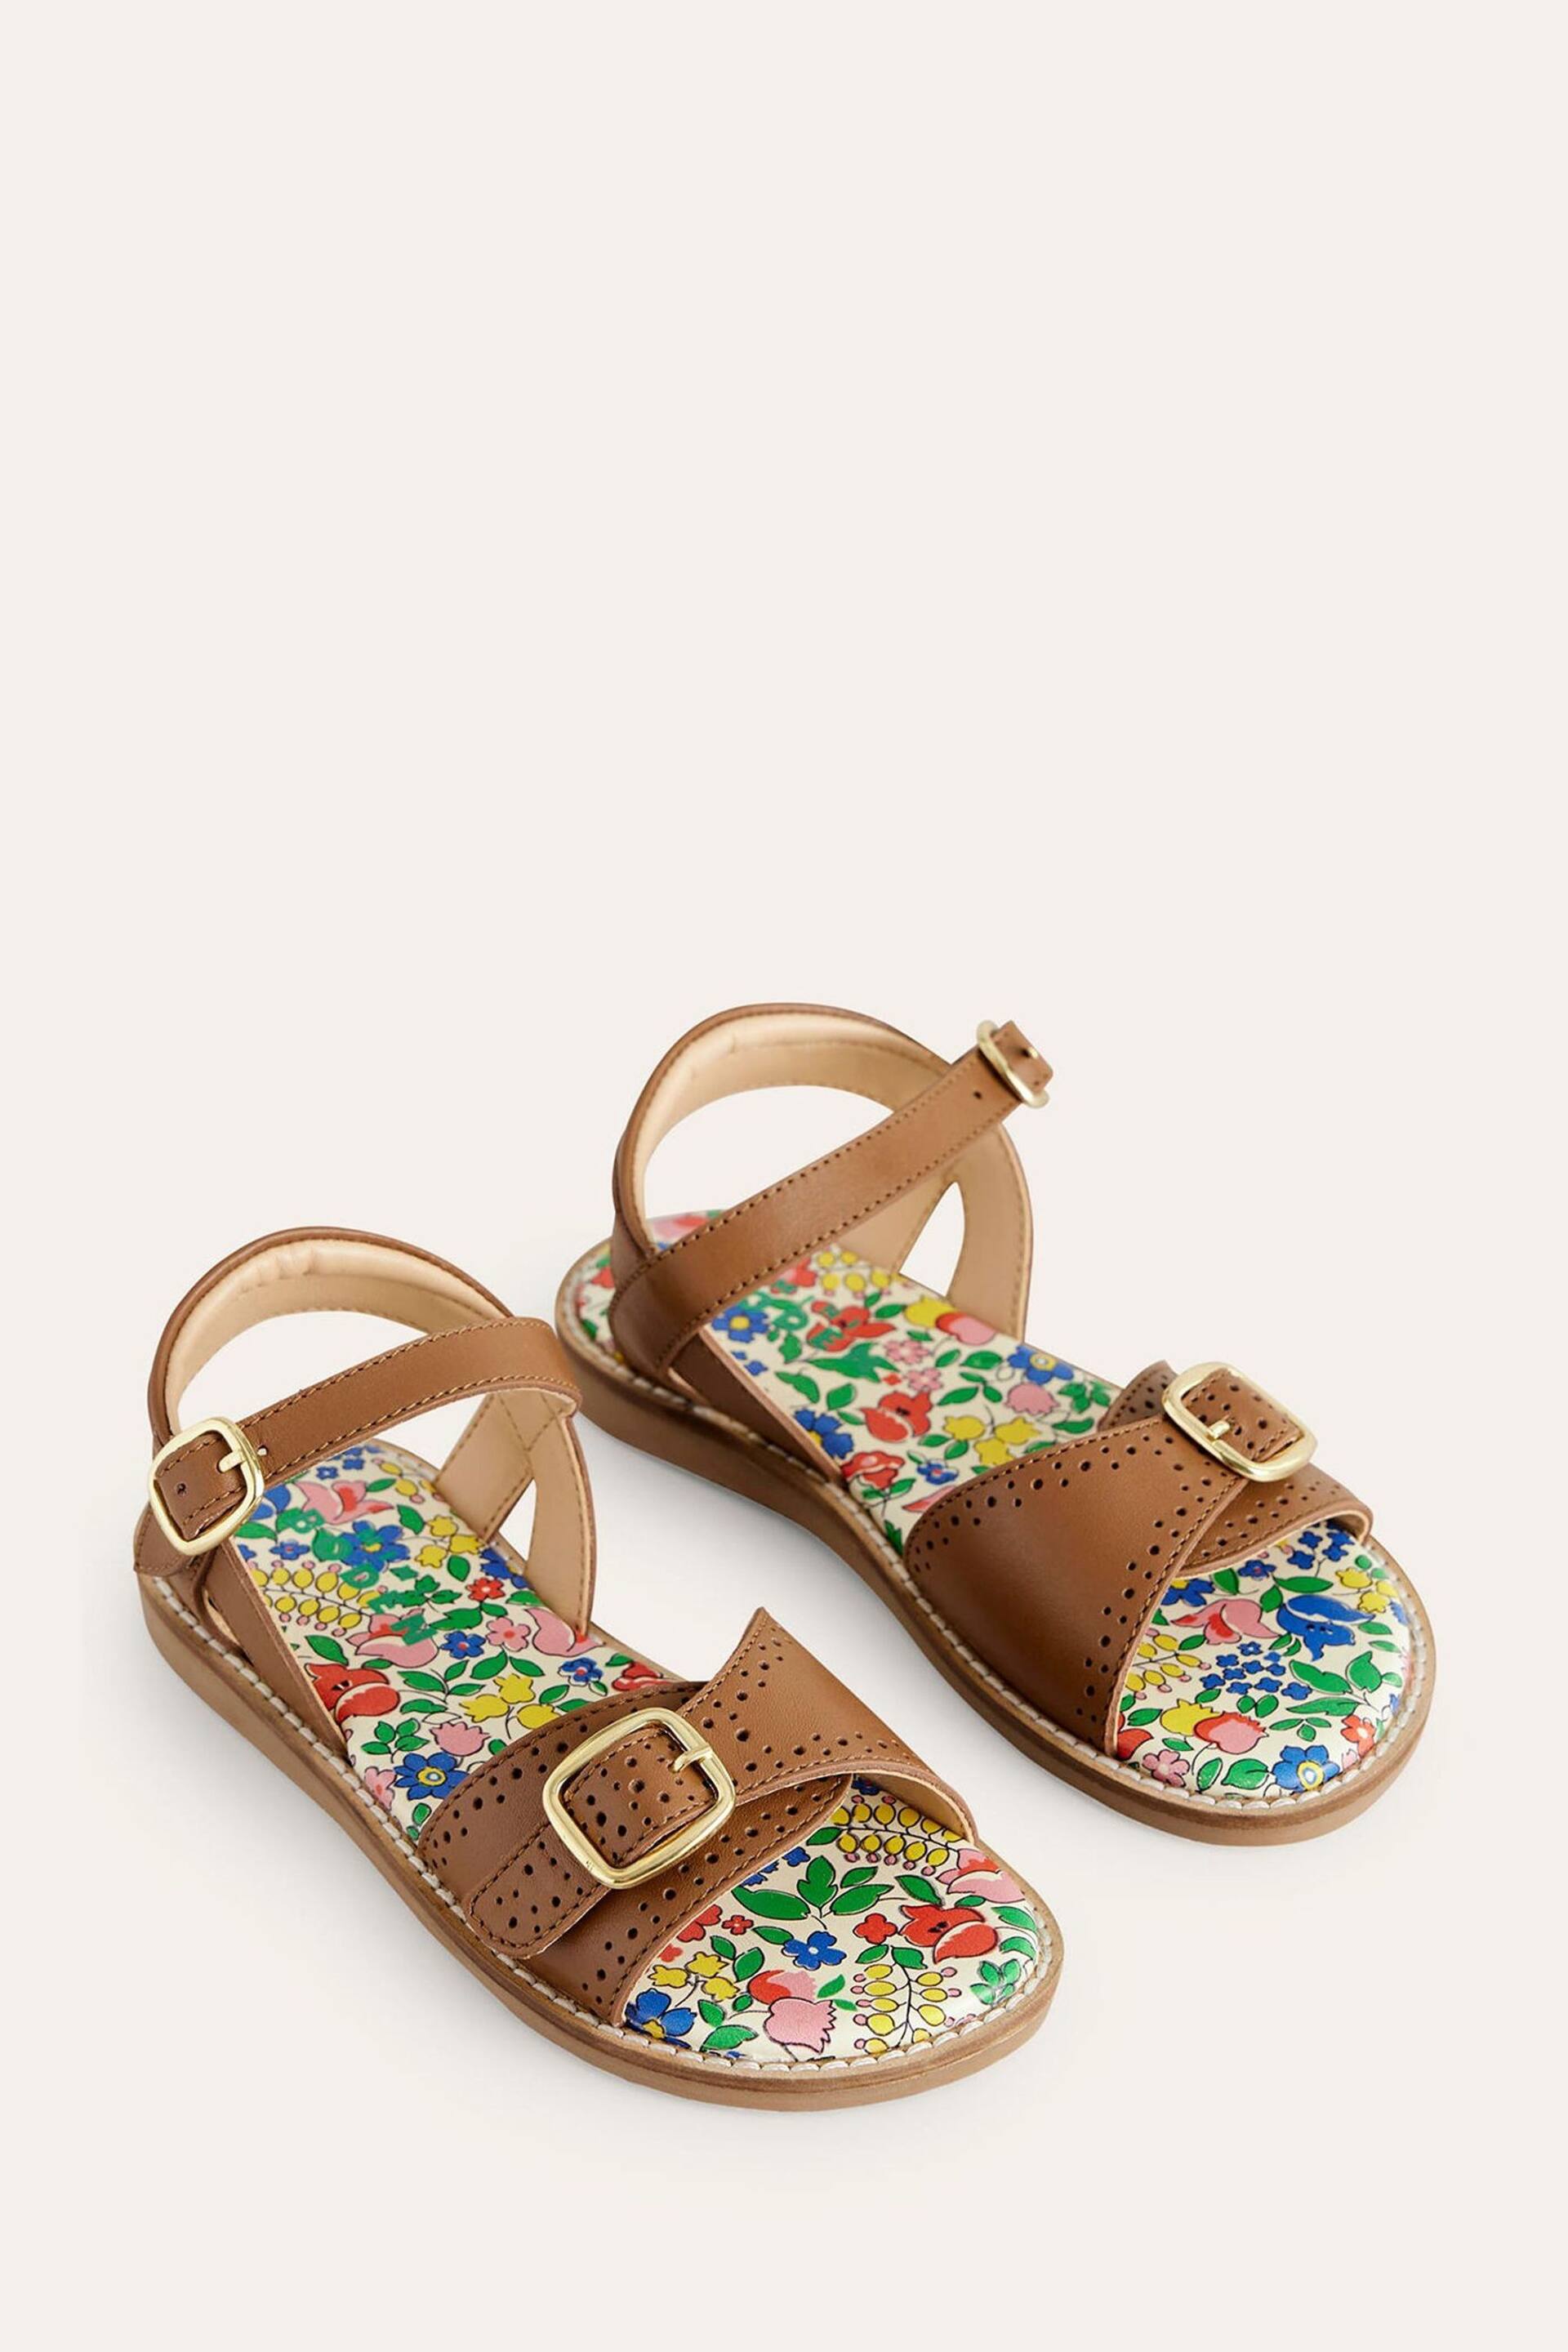 Boden Brown Leather Buckle Sandals - Image 2 of 3